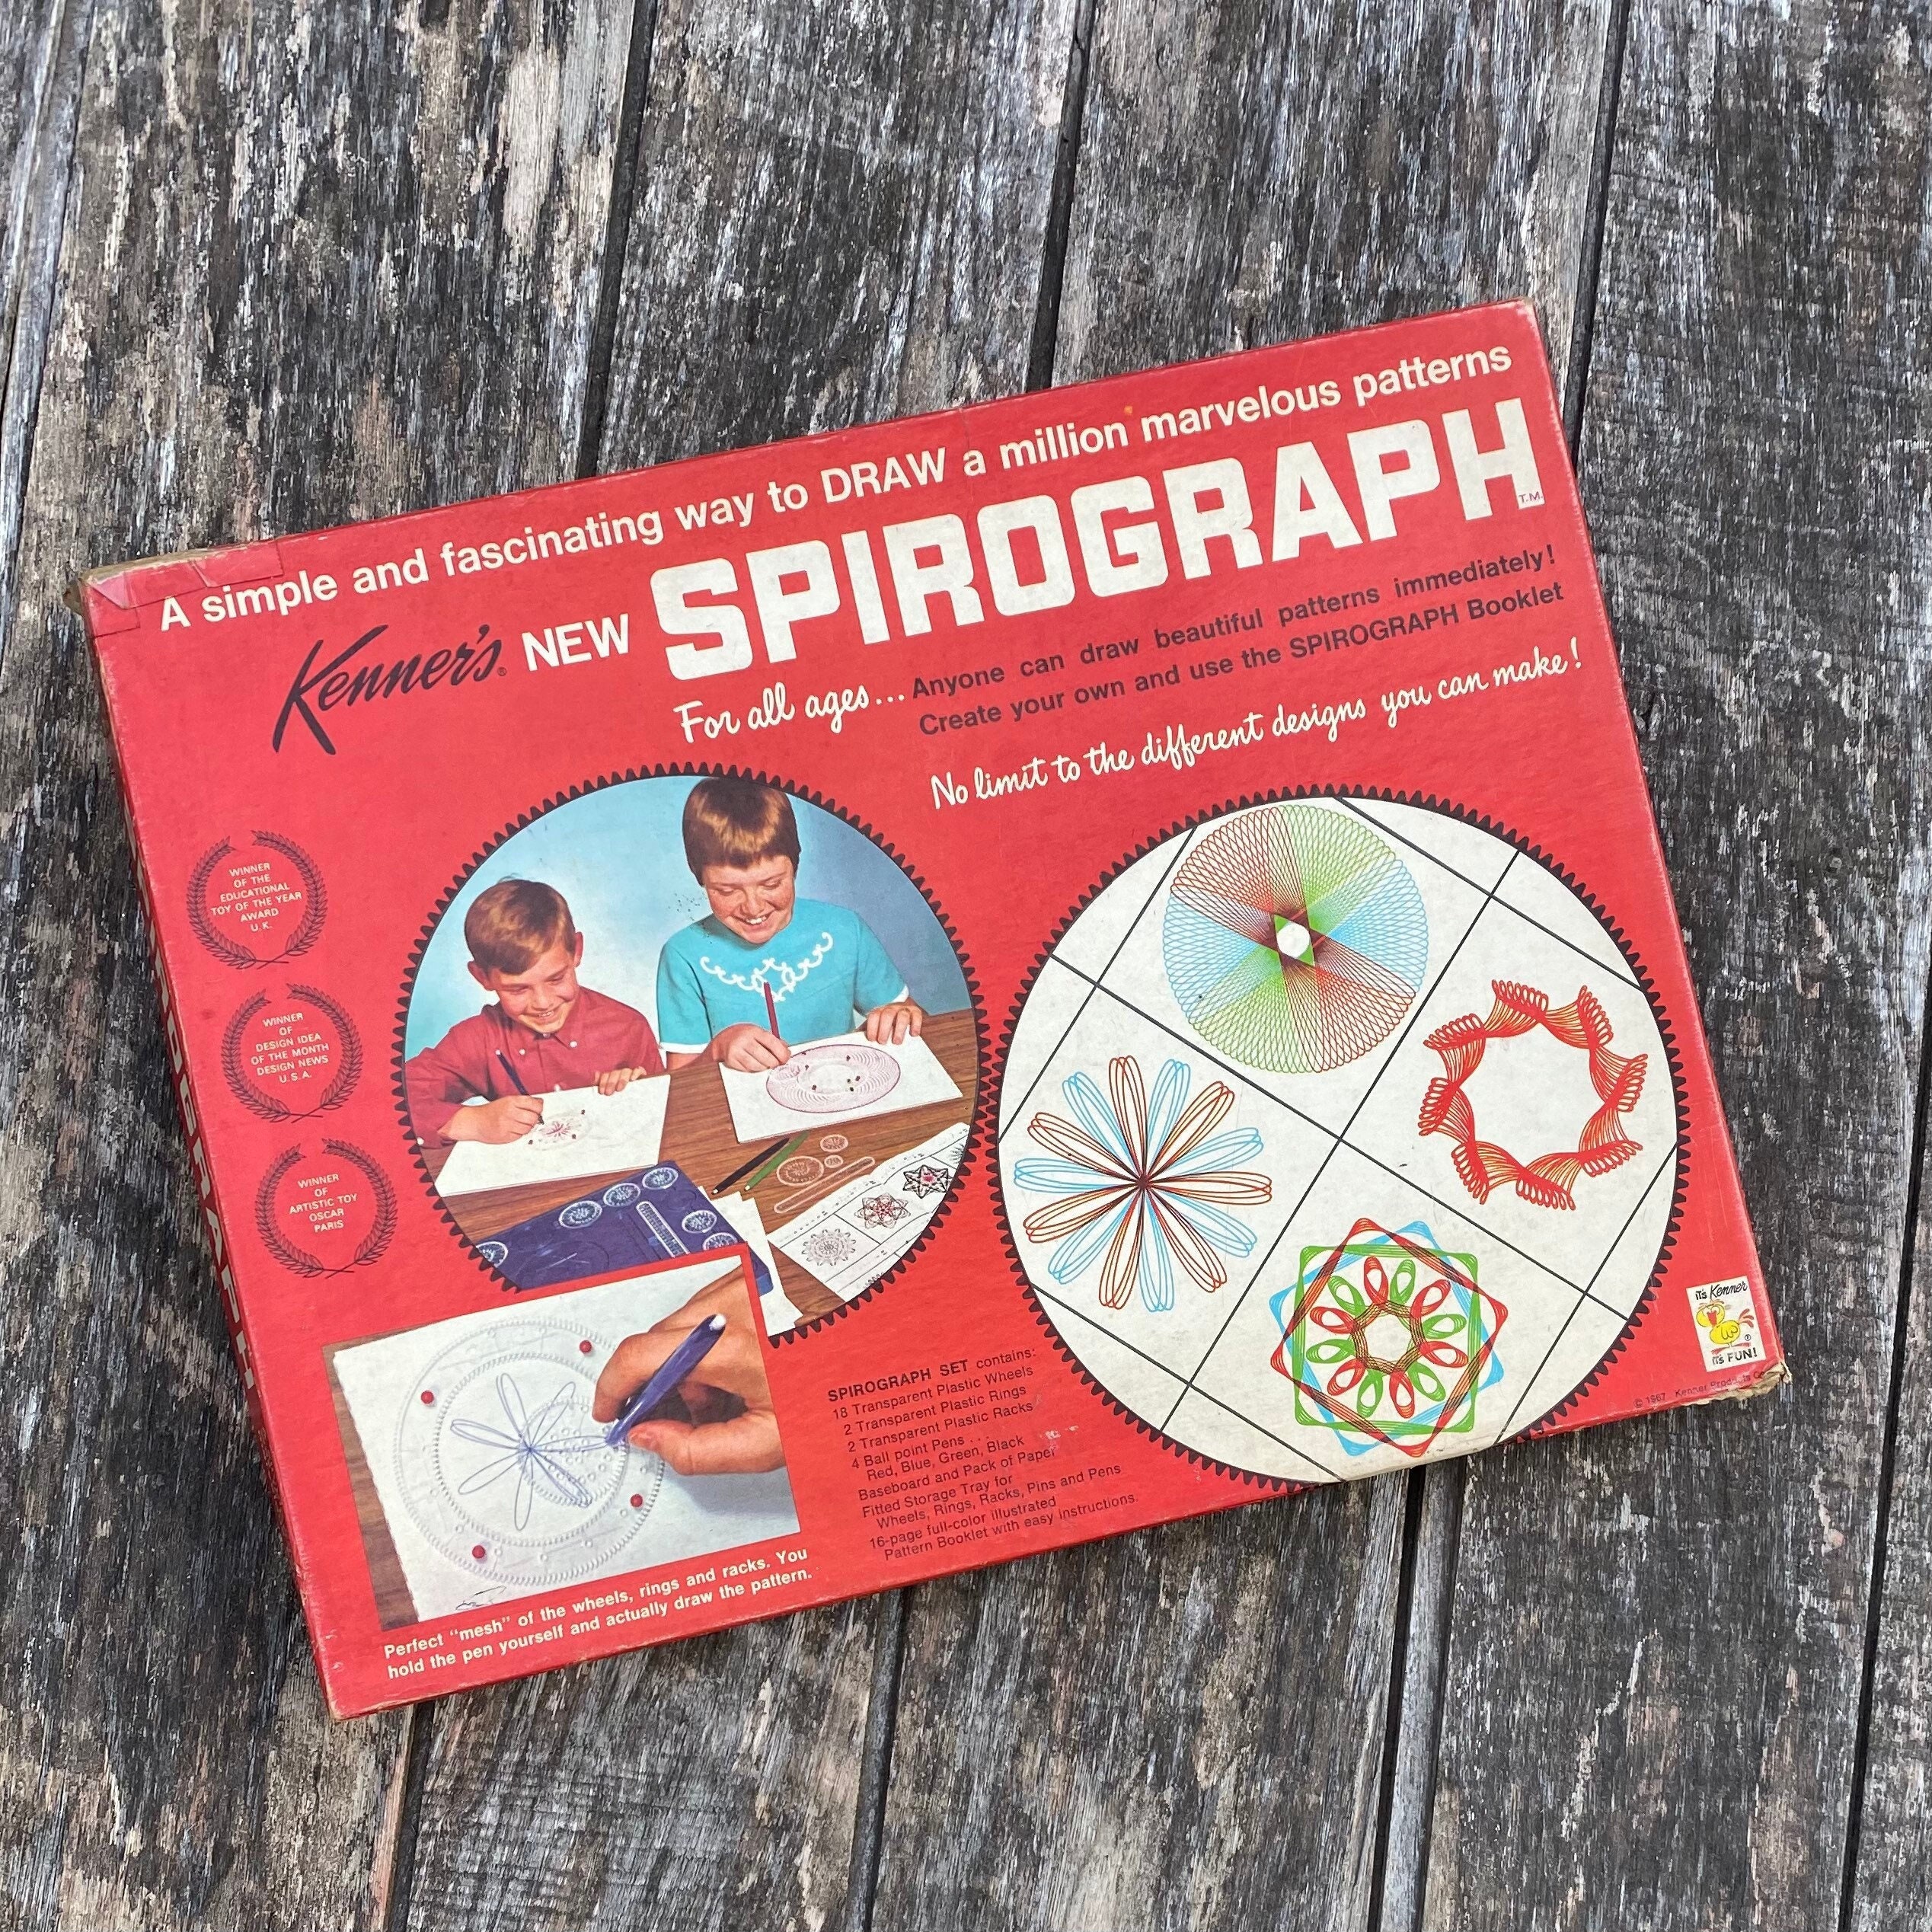 Vintage Spirograph 410 - Spiral Drawing Kit - Classic Toy Art 1968